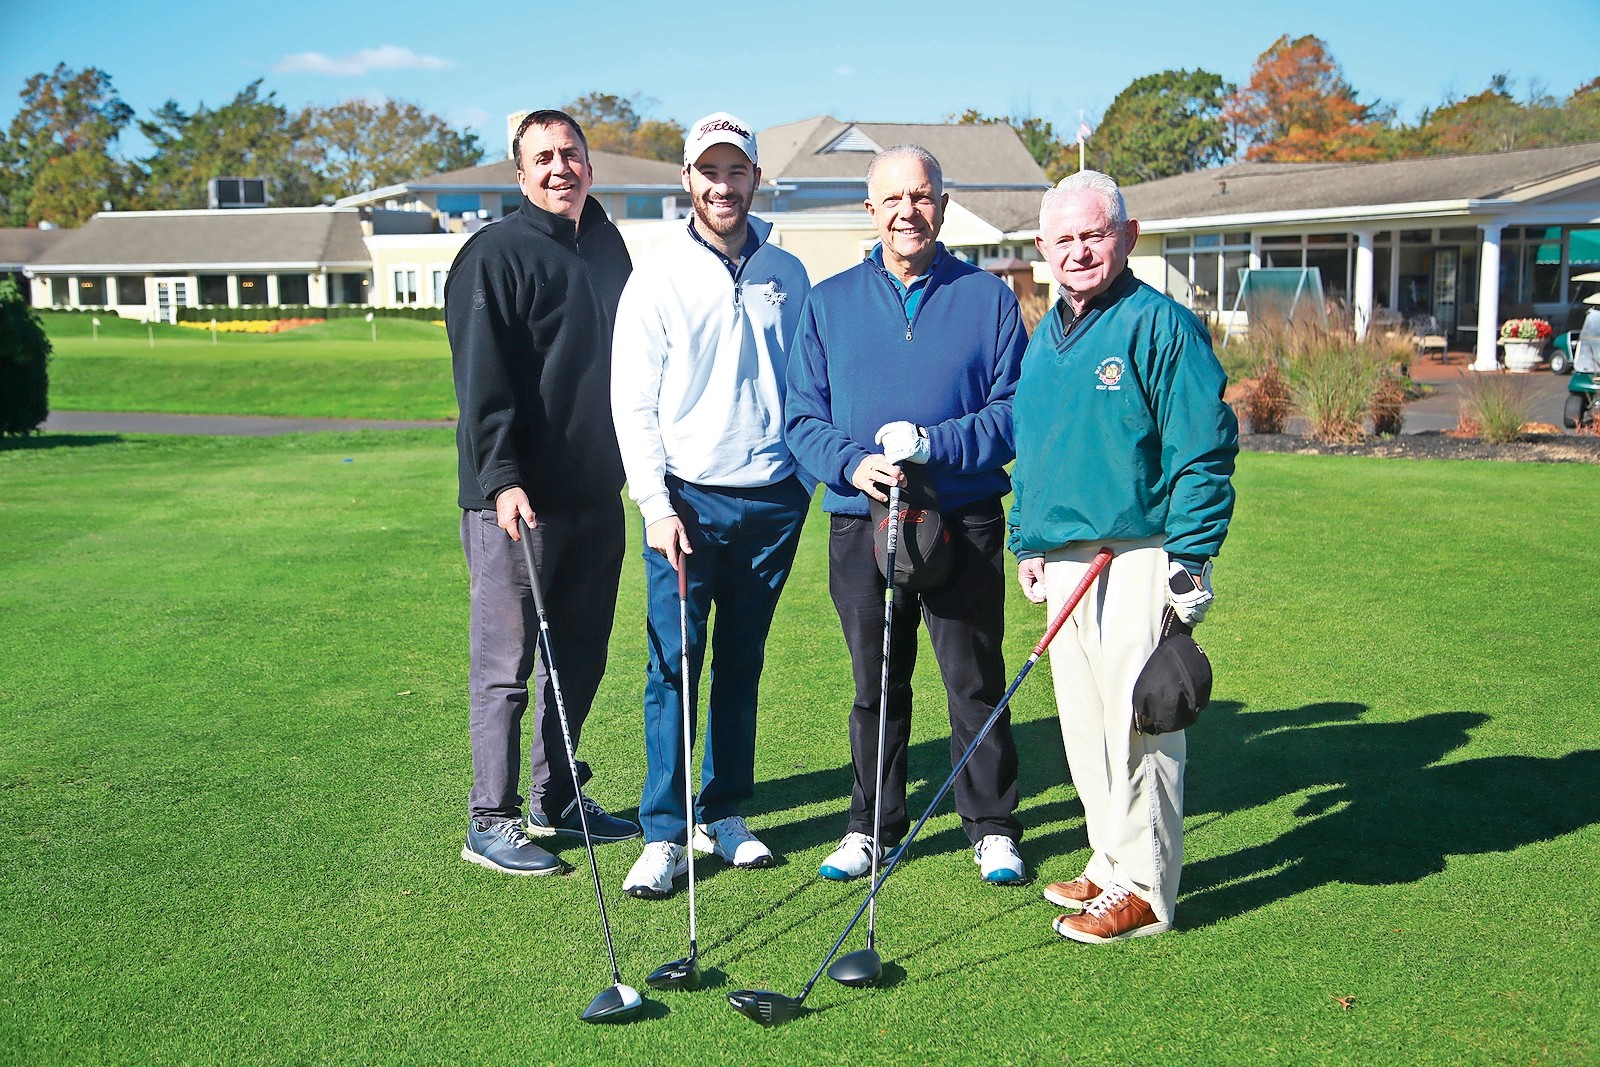 Lawrence village’s golf team consisted of Michael Alon, left, Jeremy Mehl, Randy Green and Stan Kopilow.